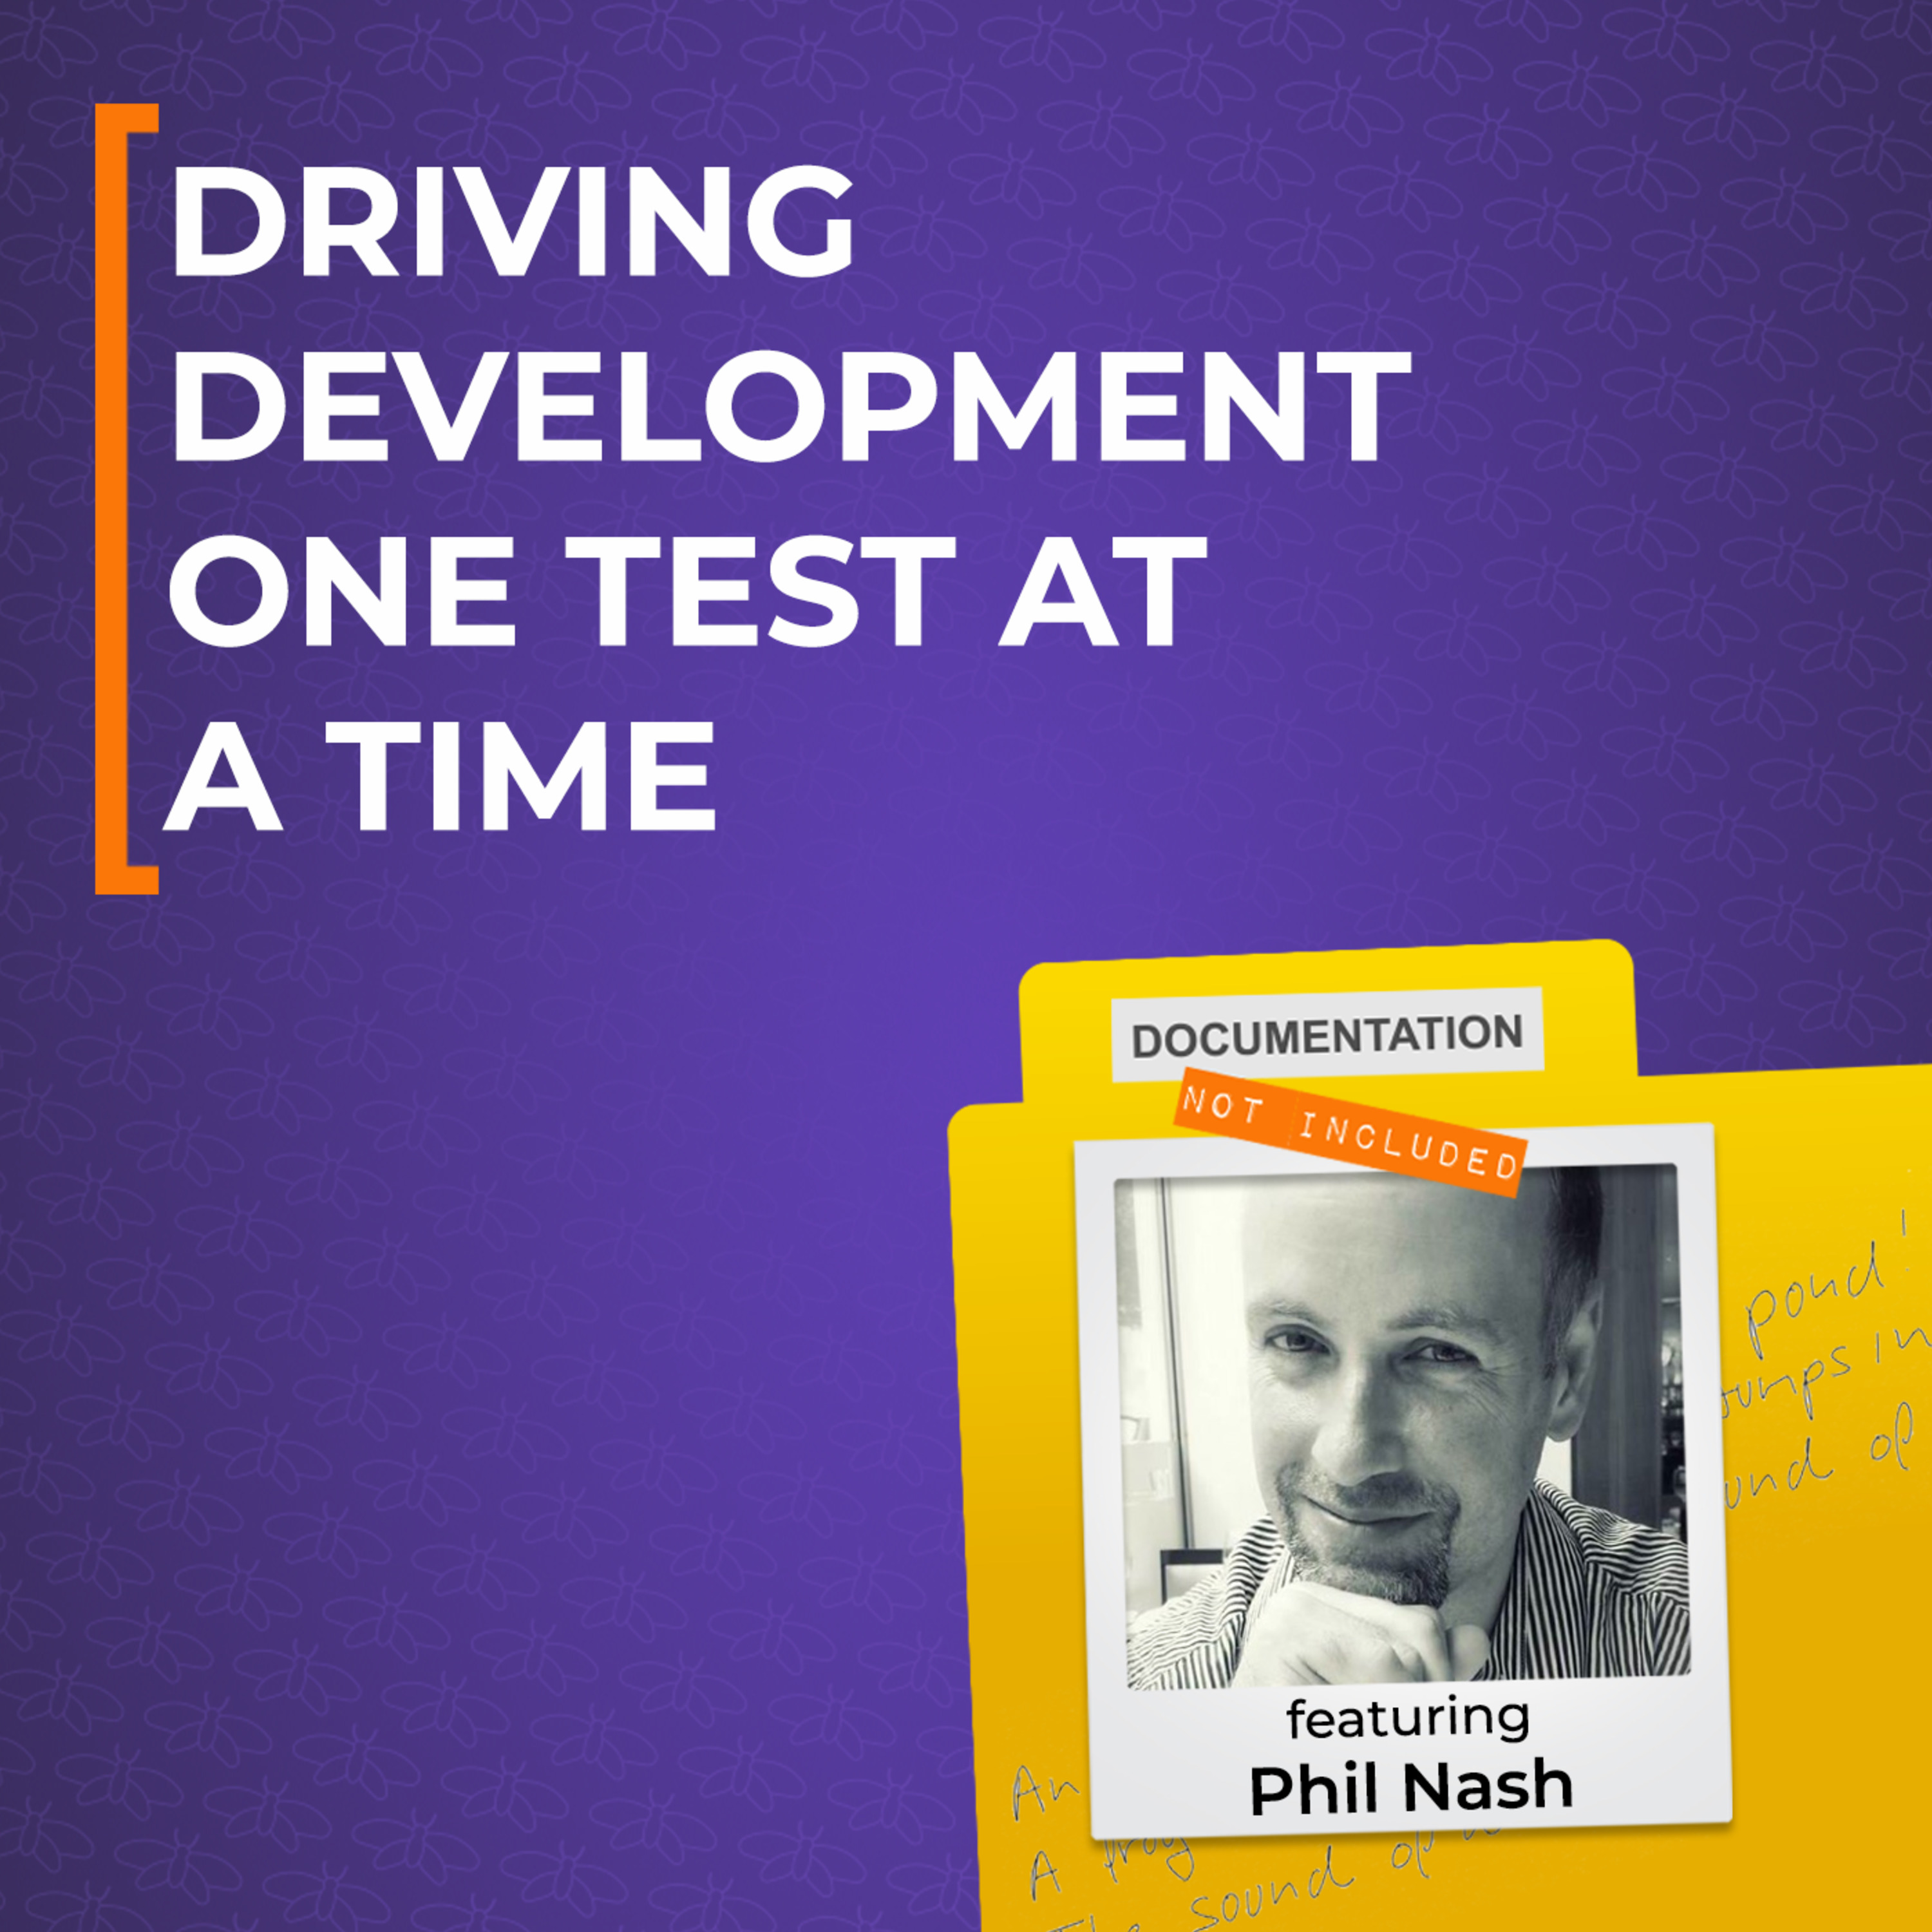 Driving Development One Test at a Time